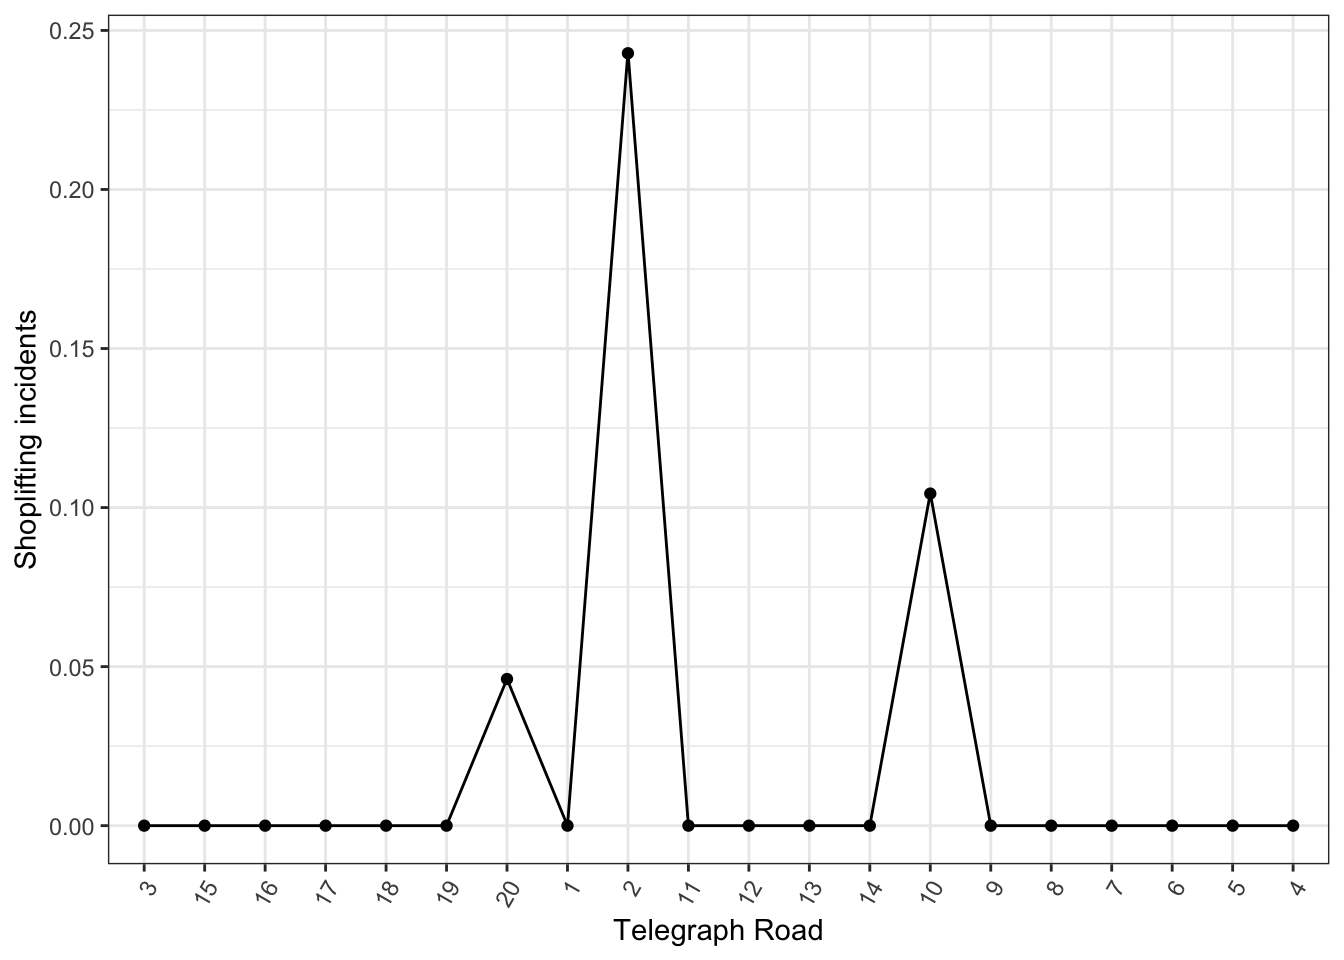 A line chart over a grey grid, with vertical axis labeled 'Shoplifting incidents' randing from zero to point two five. The horizontal axis is labeled 'Telegraph Road', and contains numbers from one to twenty, but in a jumbled order. The plot stays at zero except for three points.